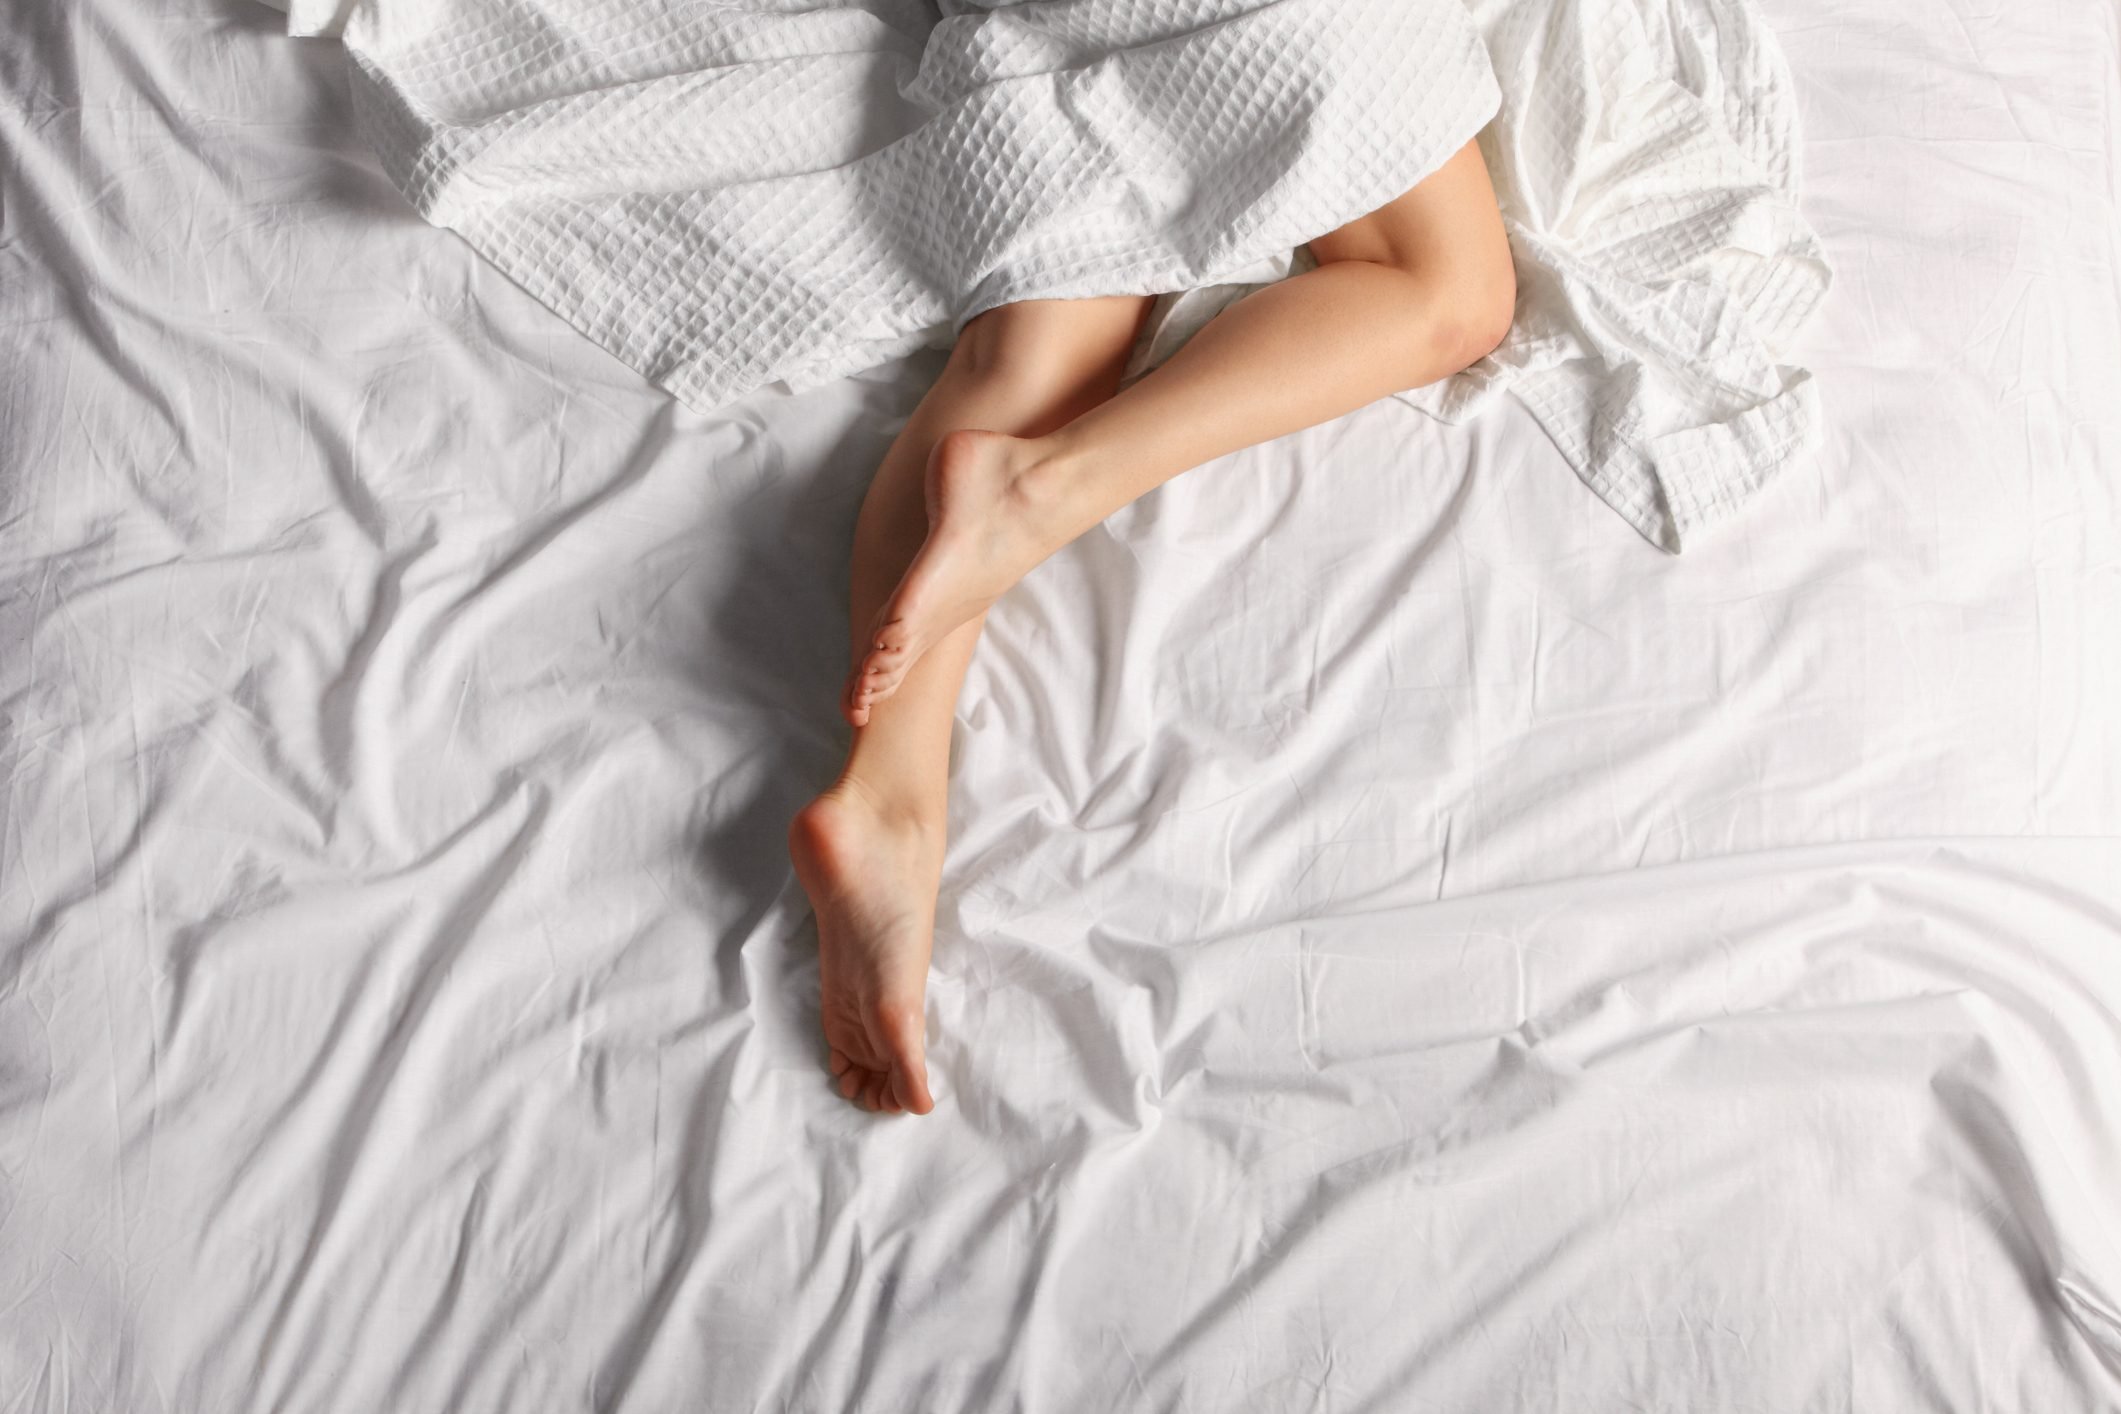 What Really Happens To Your Body If You Sleep In Your Underwear